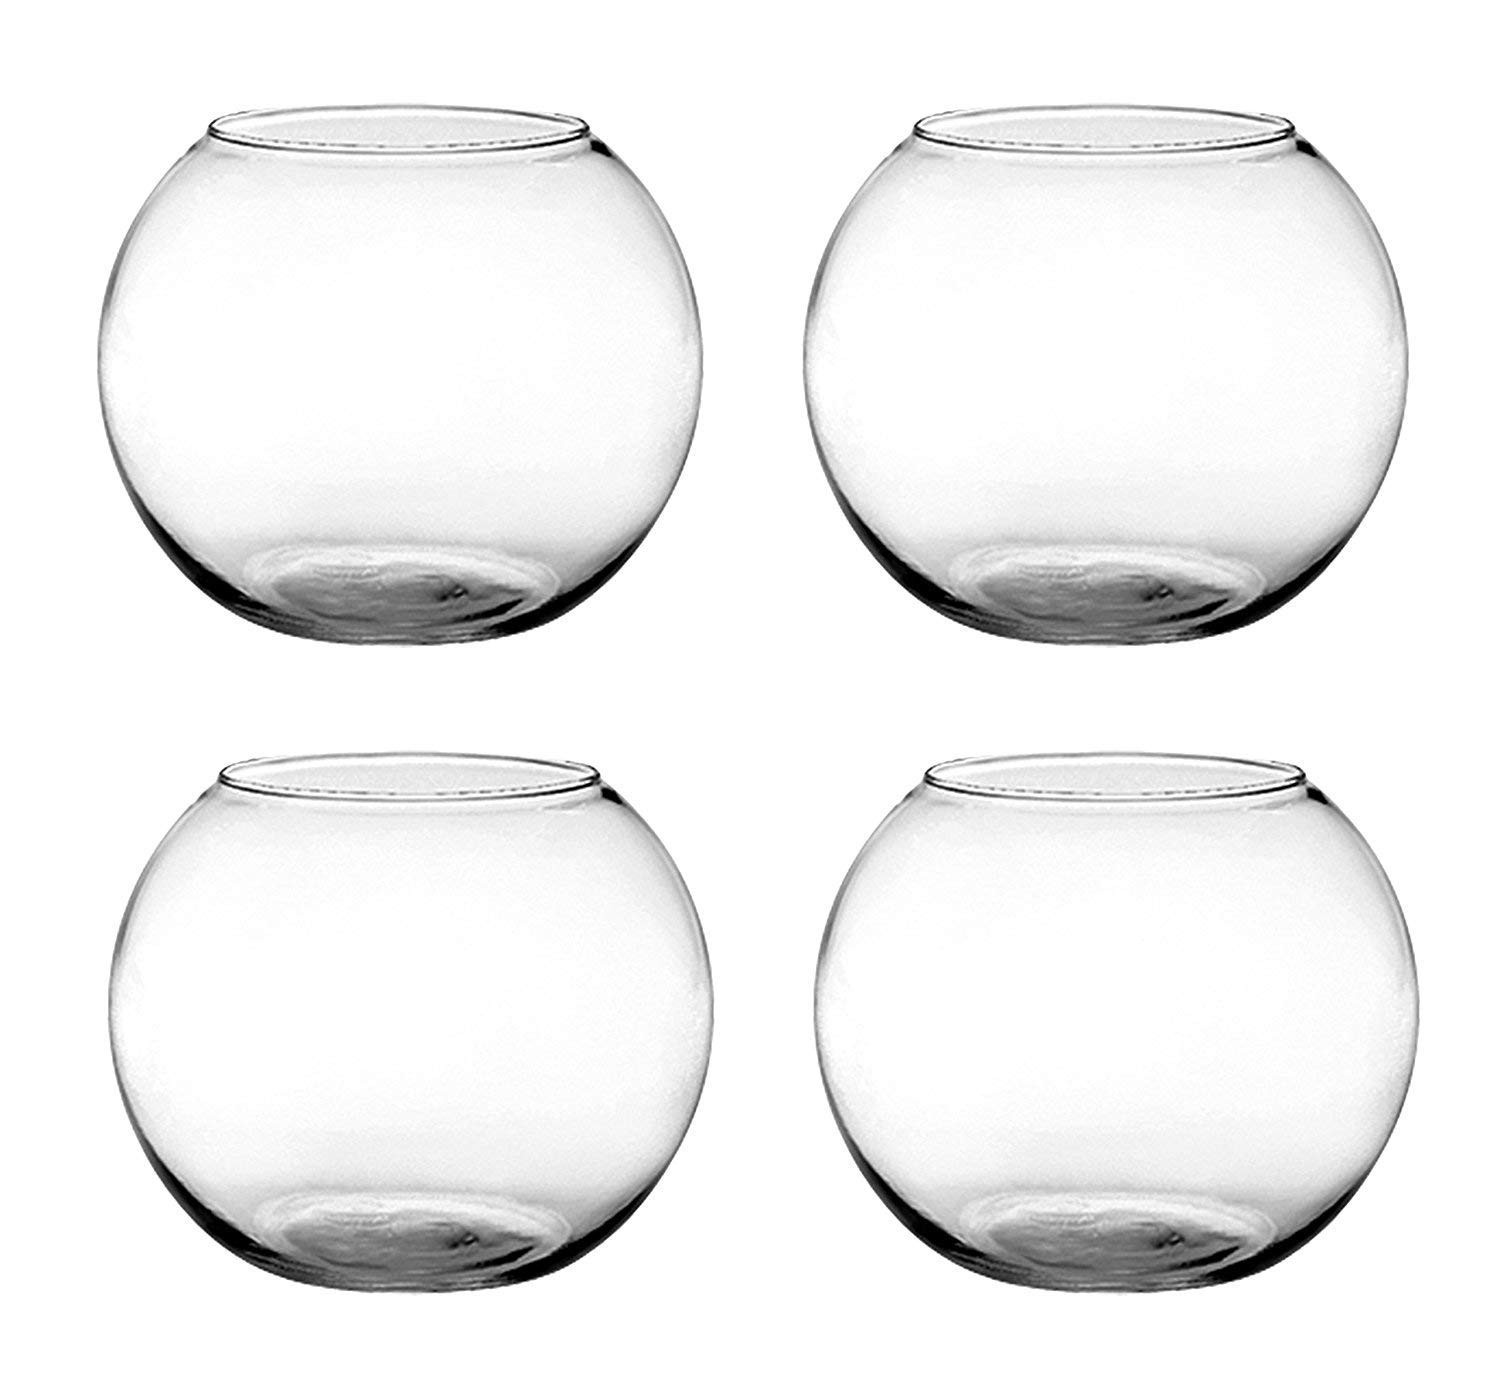 28 Unique 8 Glass Cylinder Vase 2024 free download 8 glass cylinder vase of amazon com floral supply online set of 4 6 rose bowls glass with regard to amazon com floral supply online set of 4 6 rose bowls glass round vases for weddings event